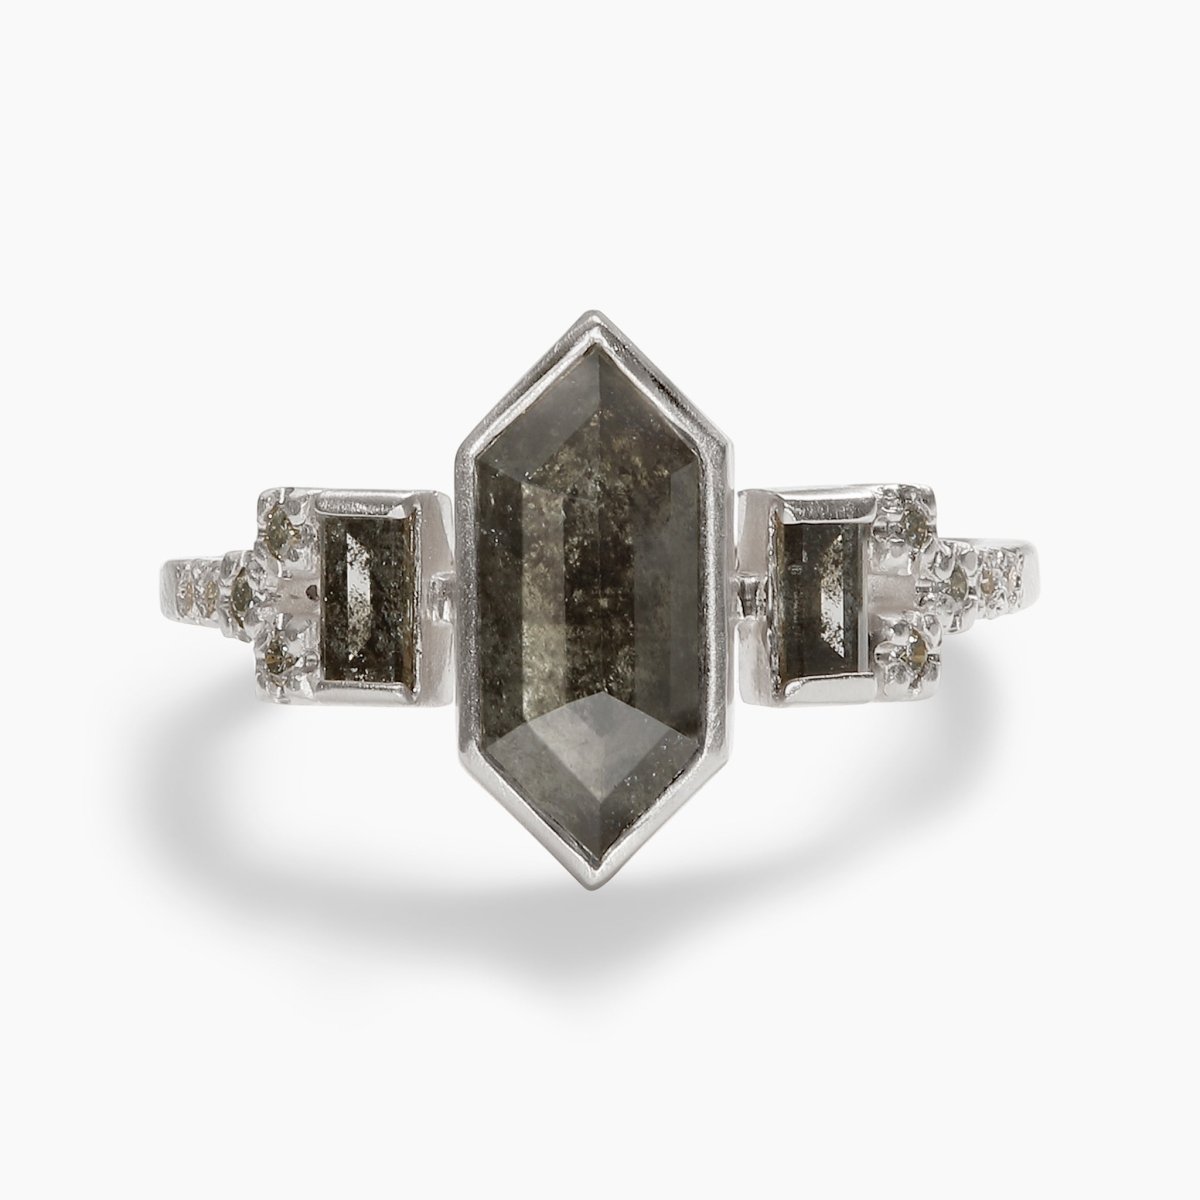 Hexagonal Libero ring. Features conflict-free salt & pepper diamonds and lab-grown white diamonds set in 14K white gold.